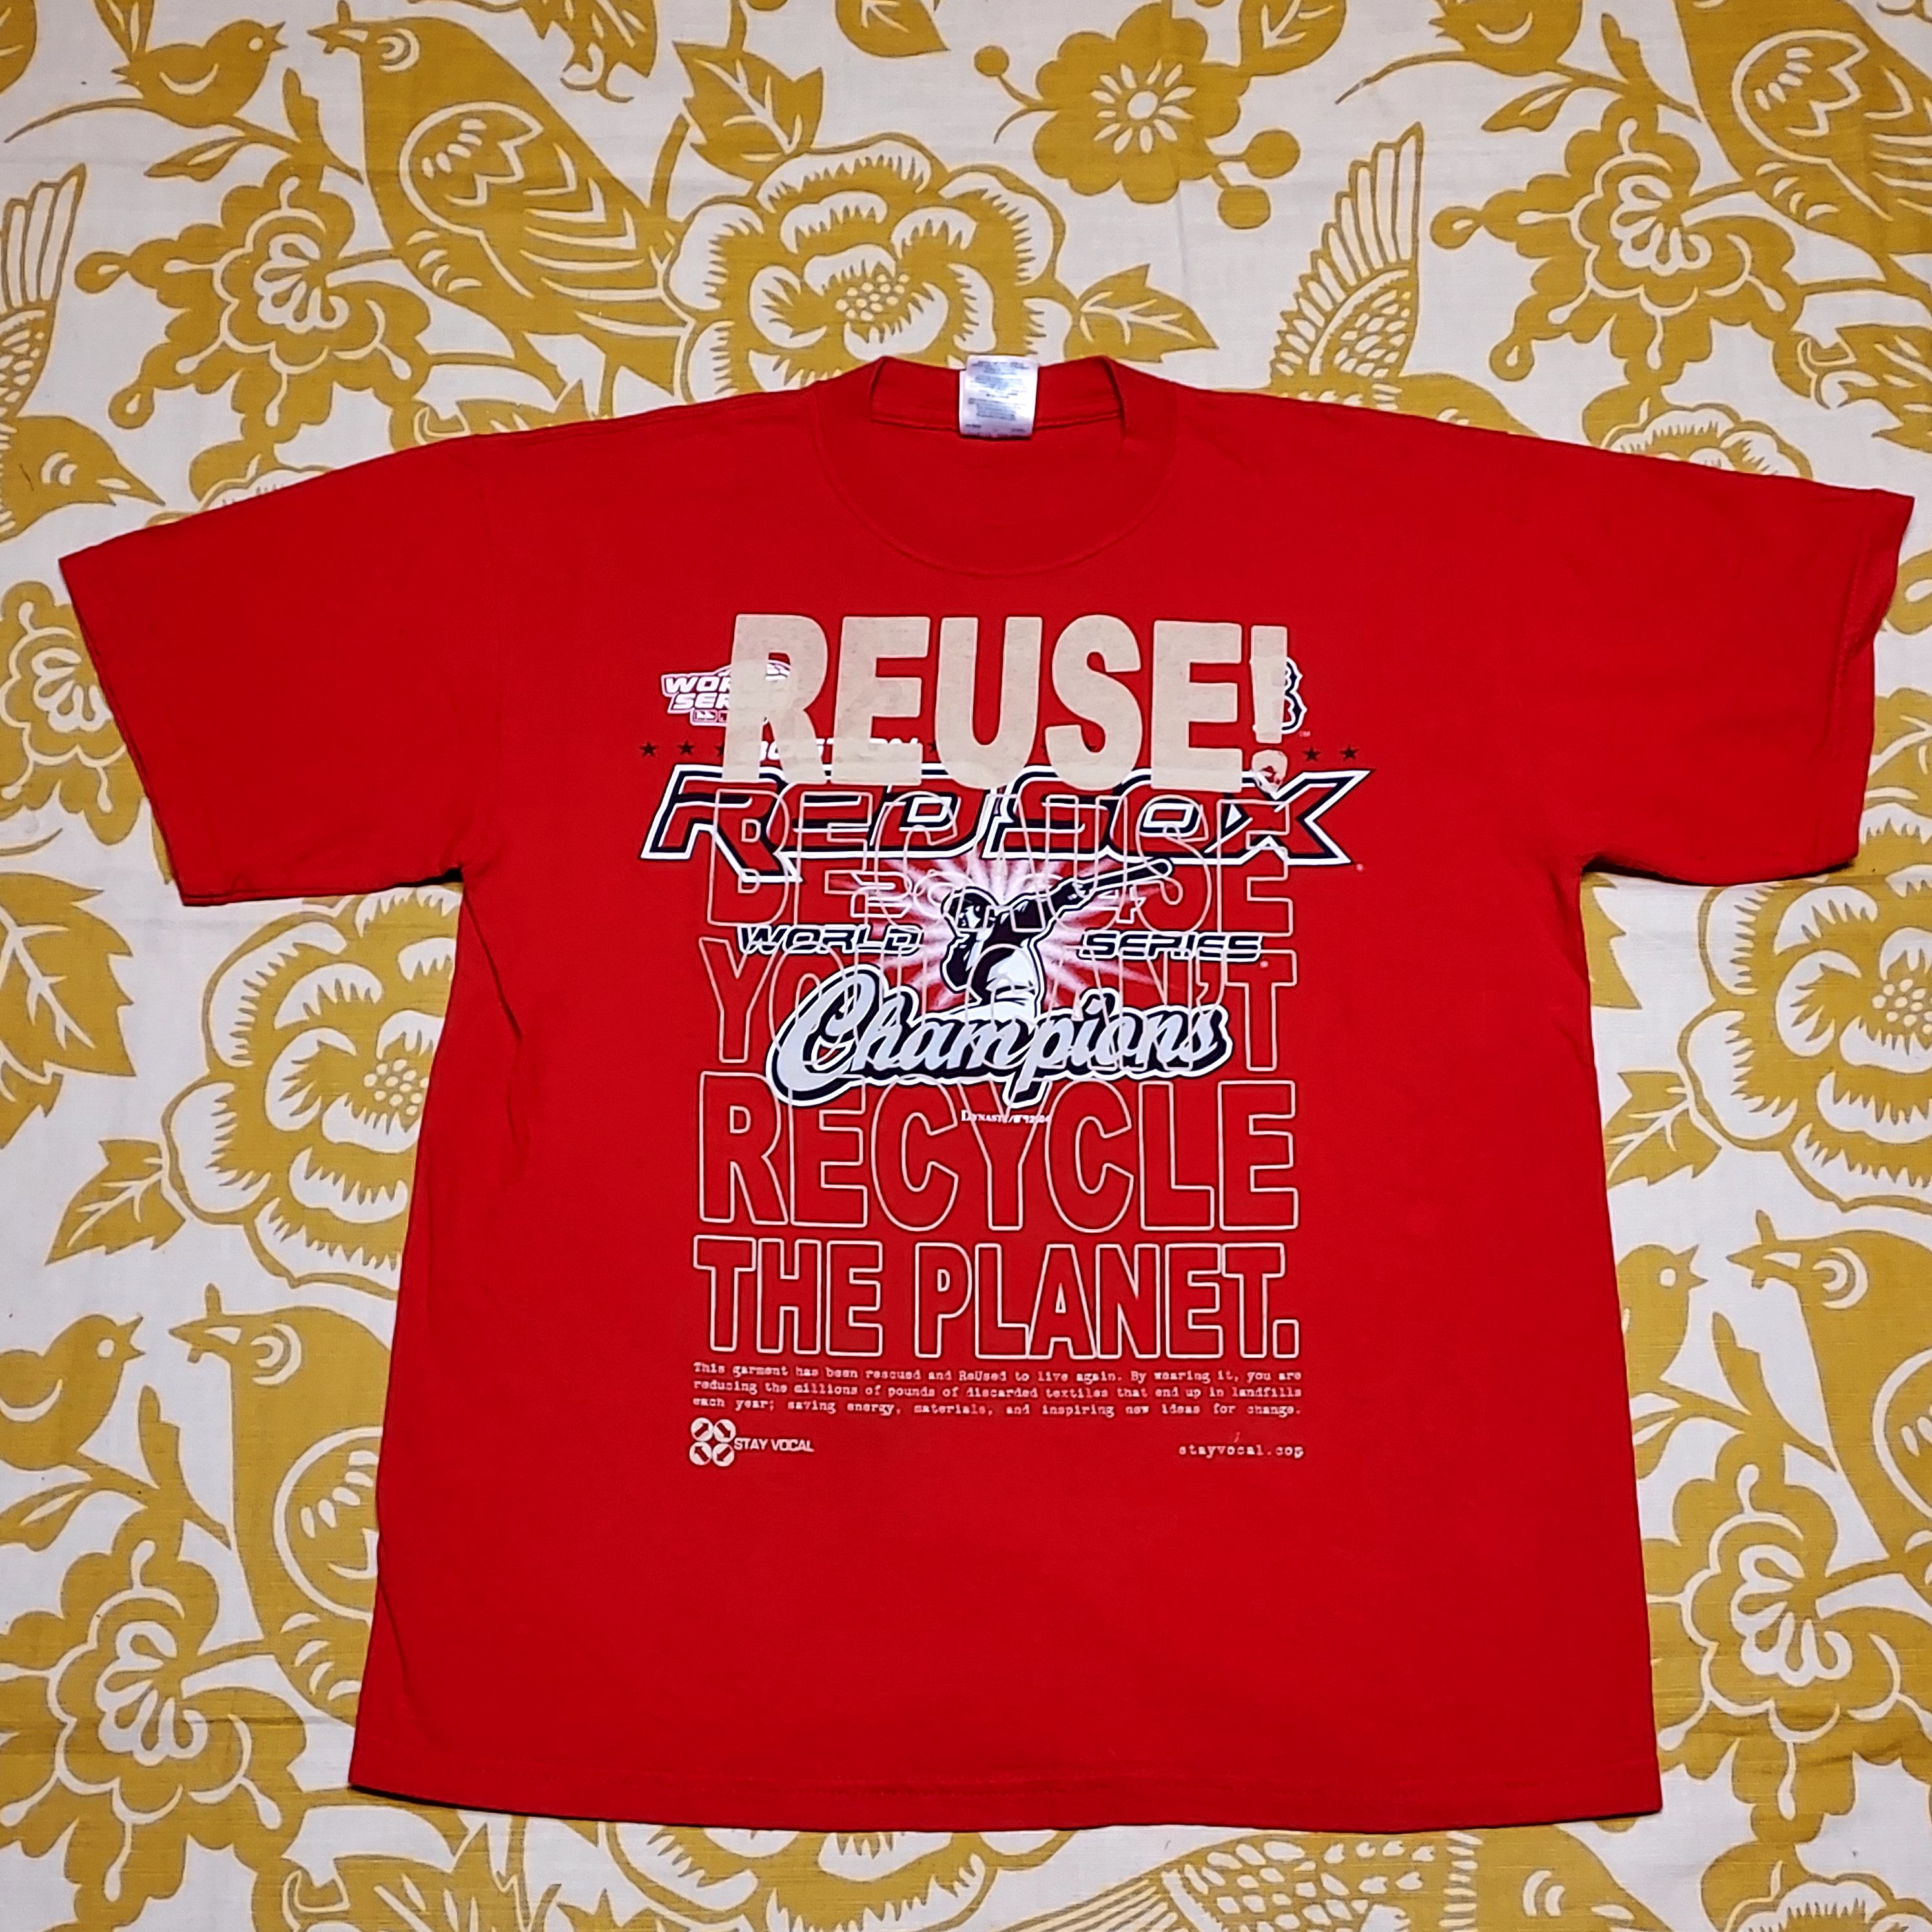 One of a Kind (Men's M) REUSE! Red Sox 2004 World Series Champions T-Shirt